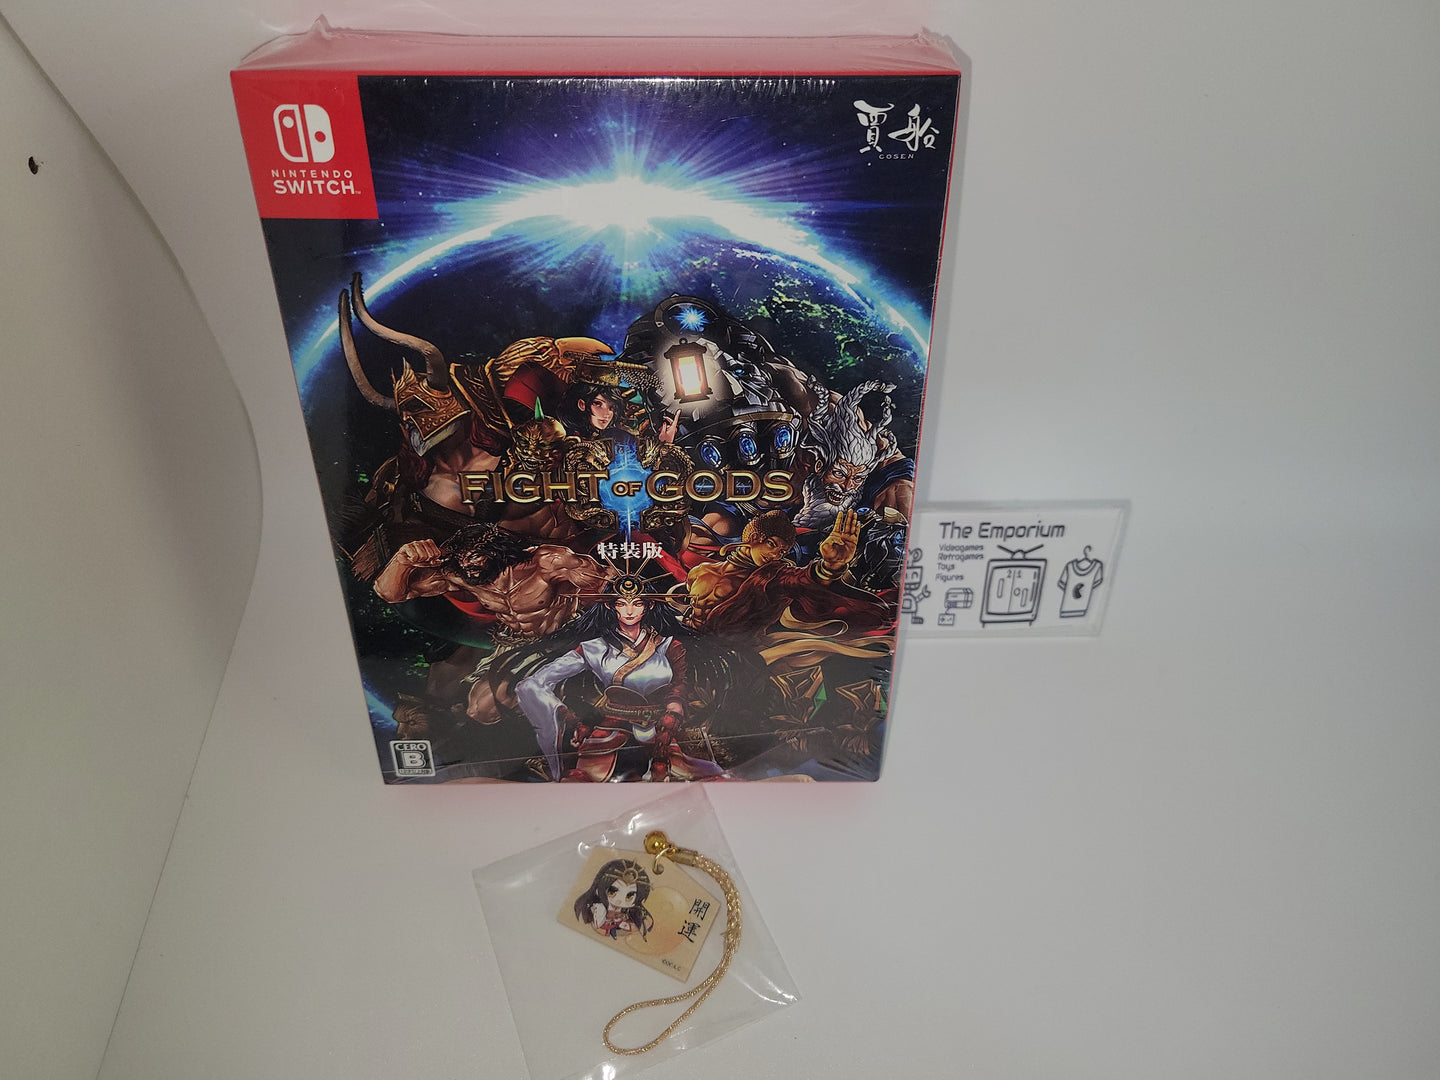 Fight of Gods Limited Edition with 1 preorder bonus - Nintendo Switch NSW